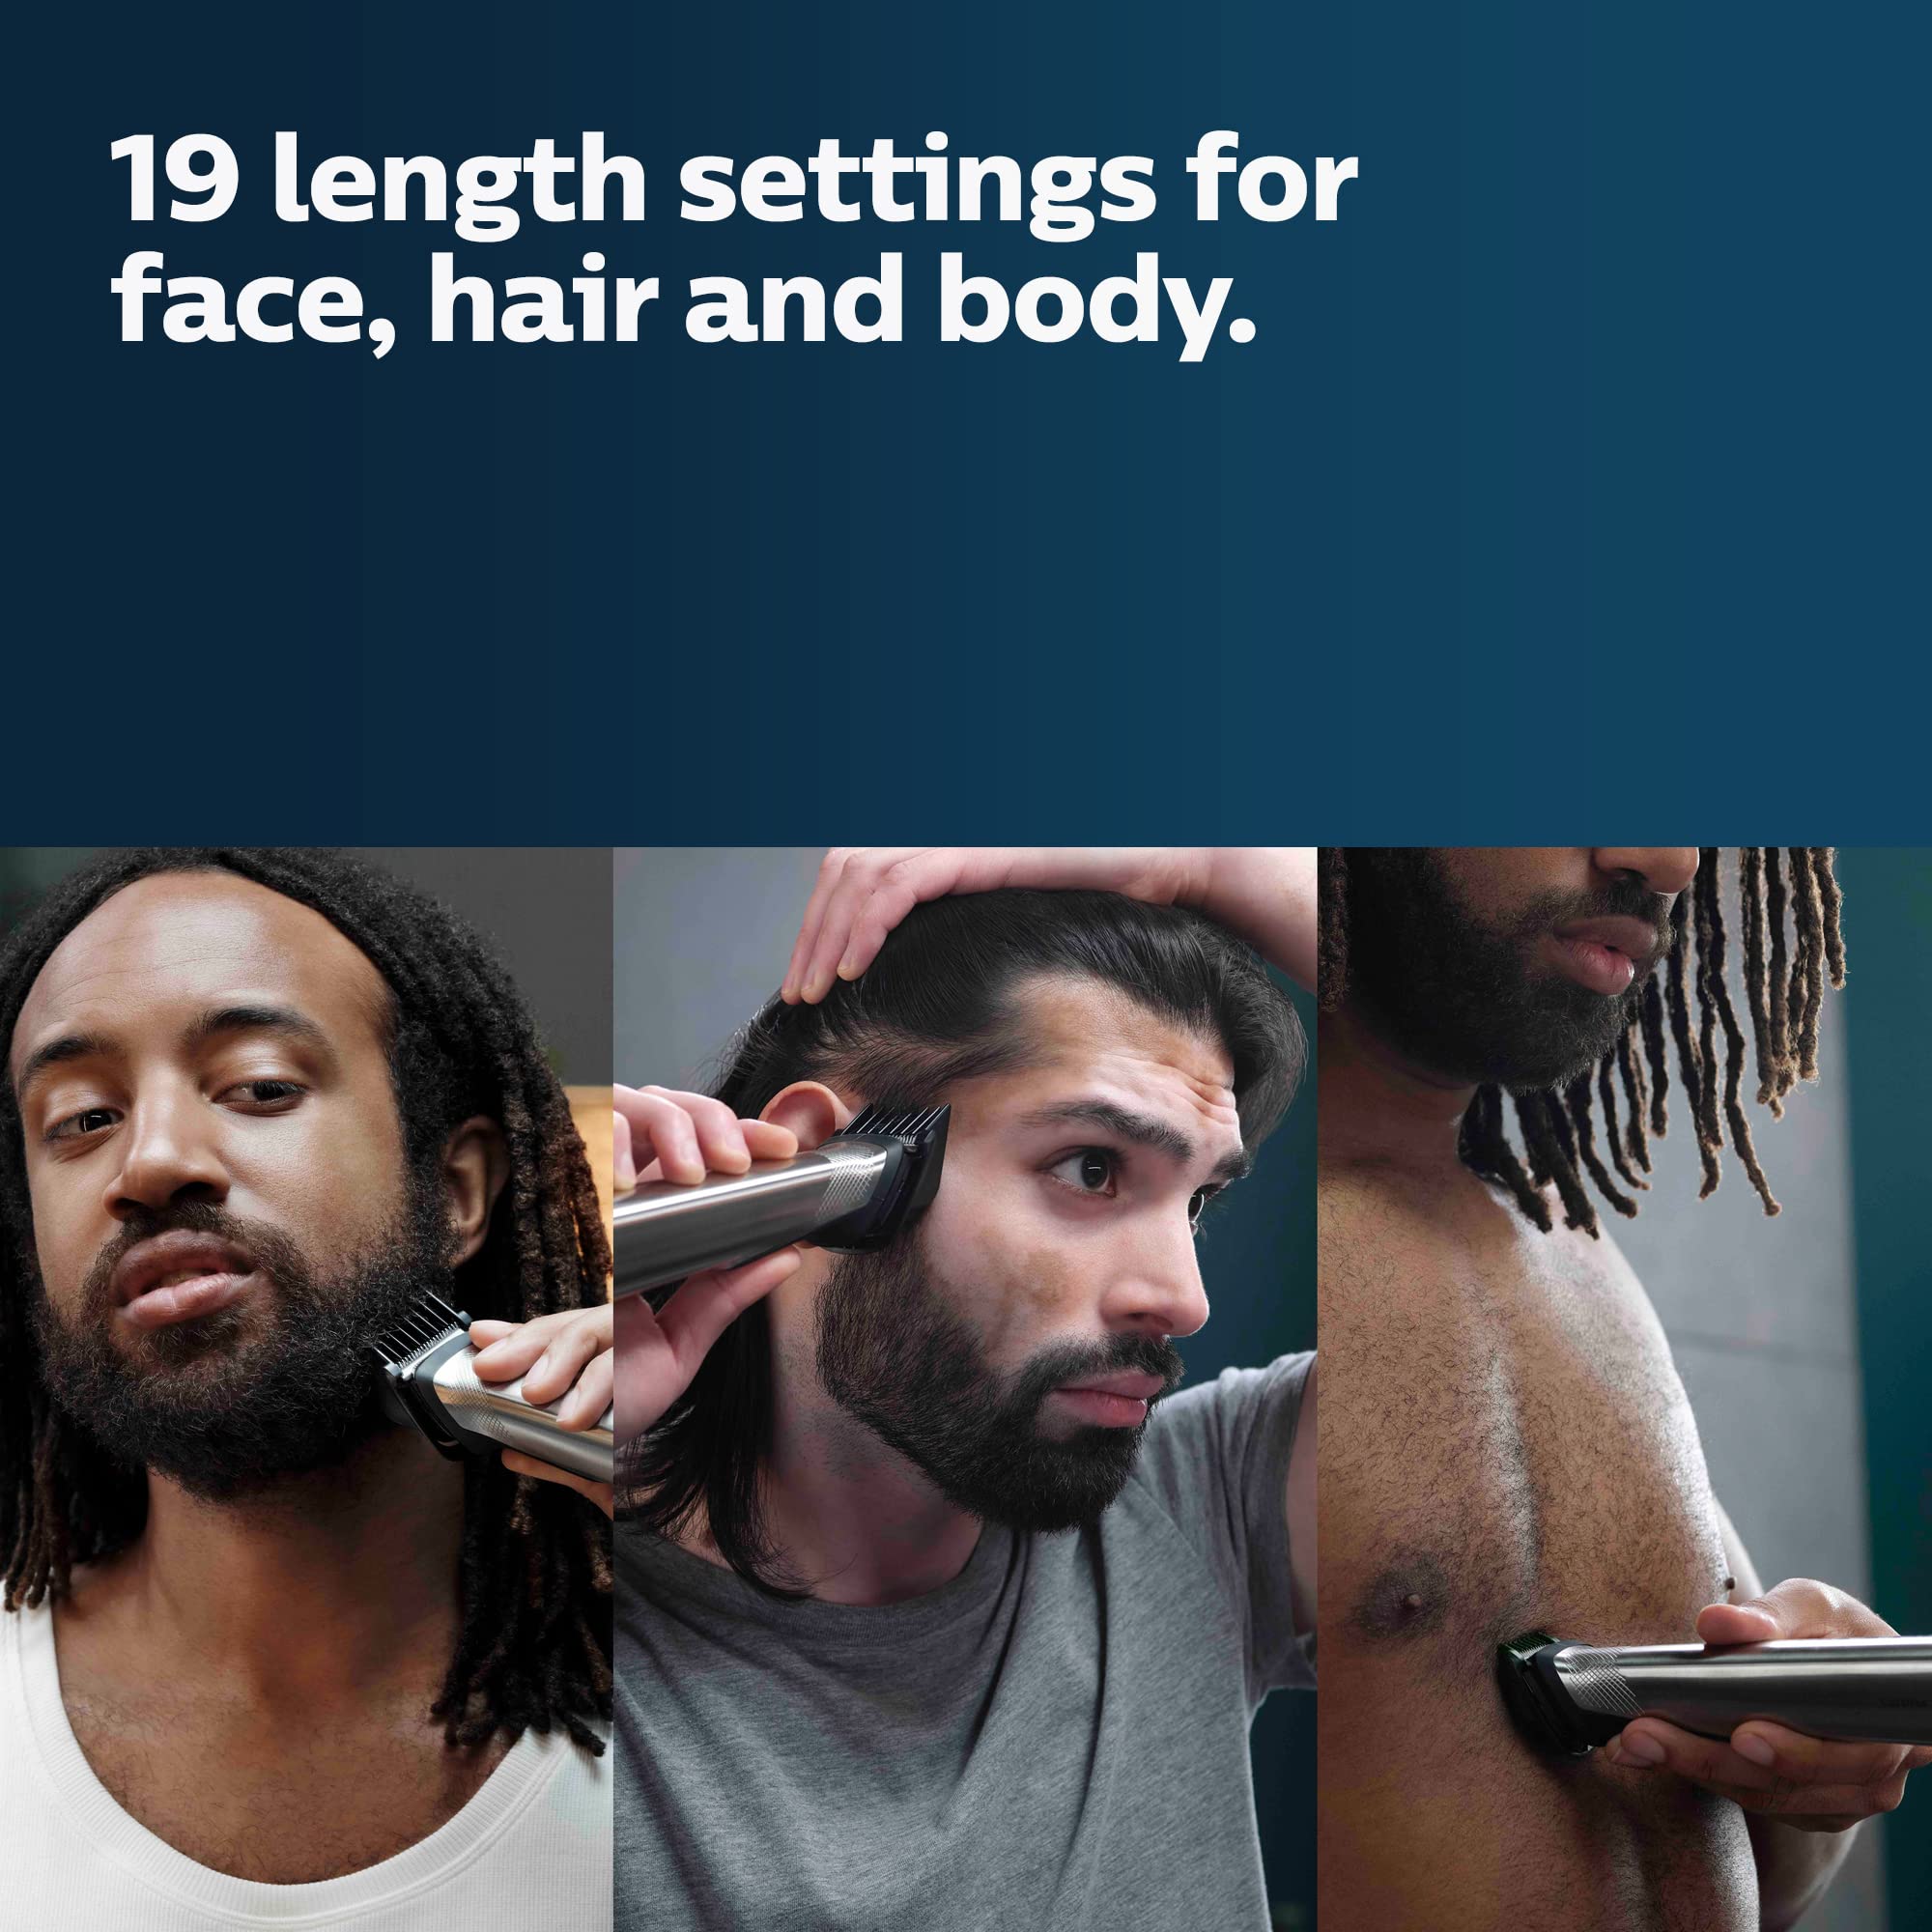 NEW Philips Norelco Multigroom Series 9000 - 21 piece Men's Grooming Kit for beard, body, face, nose, ear hair trimmer w/ premium storage case, MG9510/60